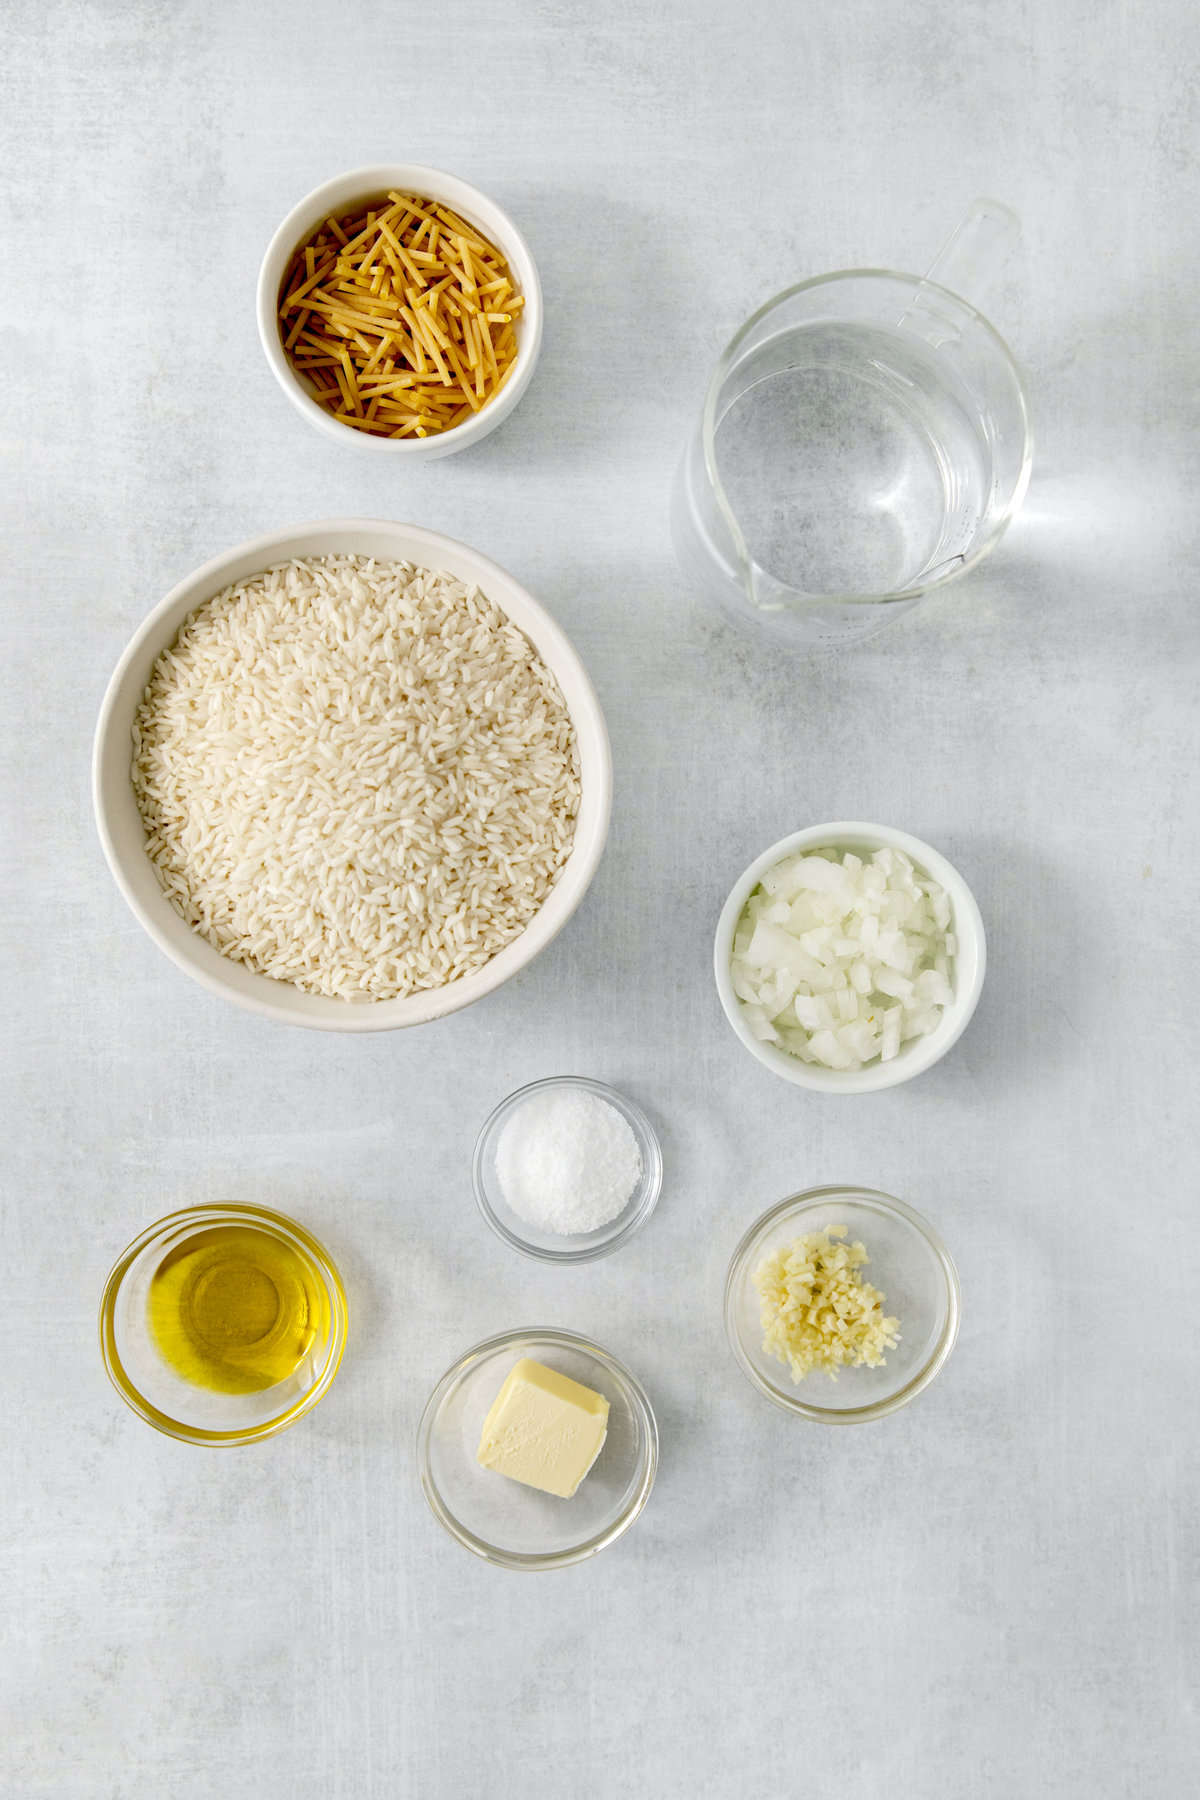 pilaf rice ingredients in separate dishes.